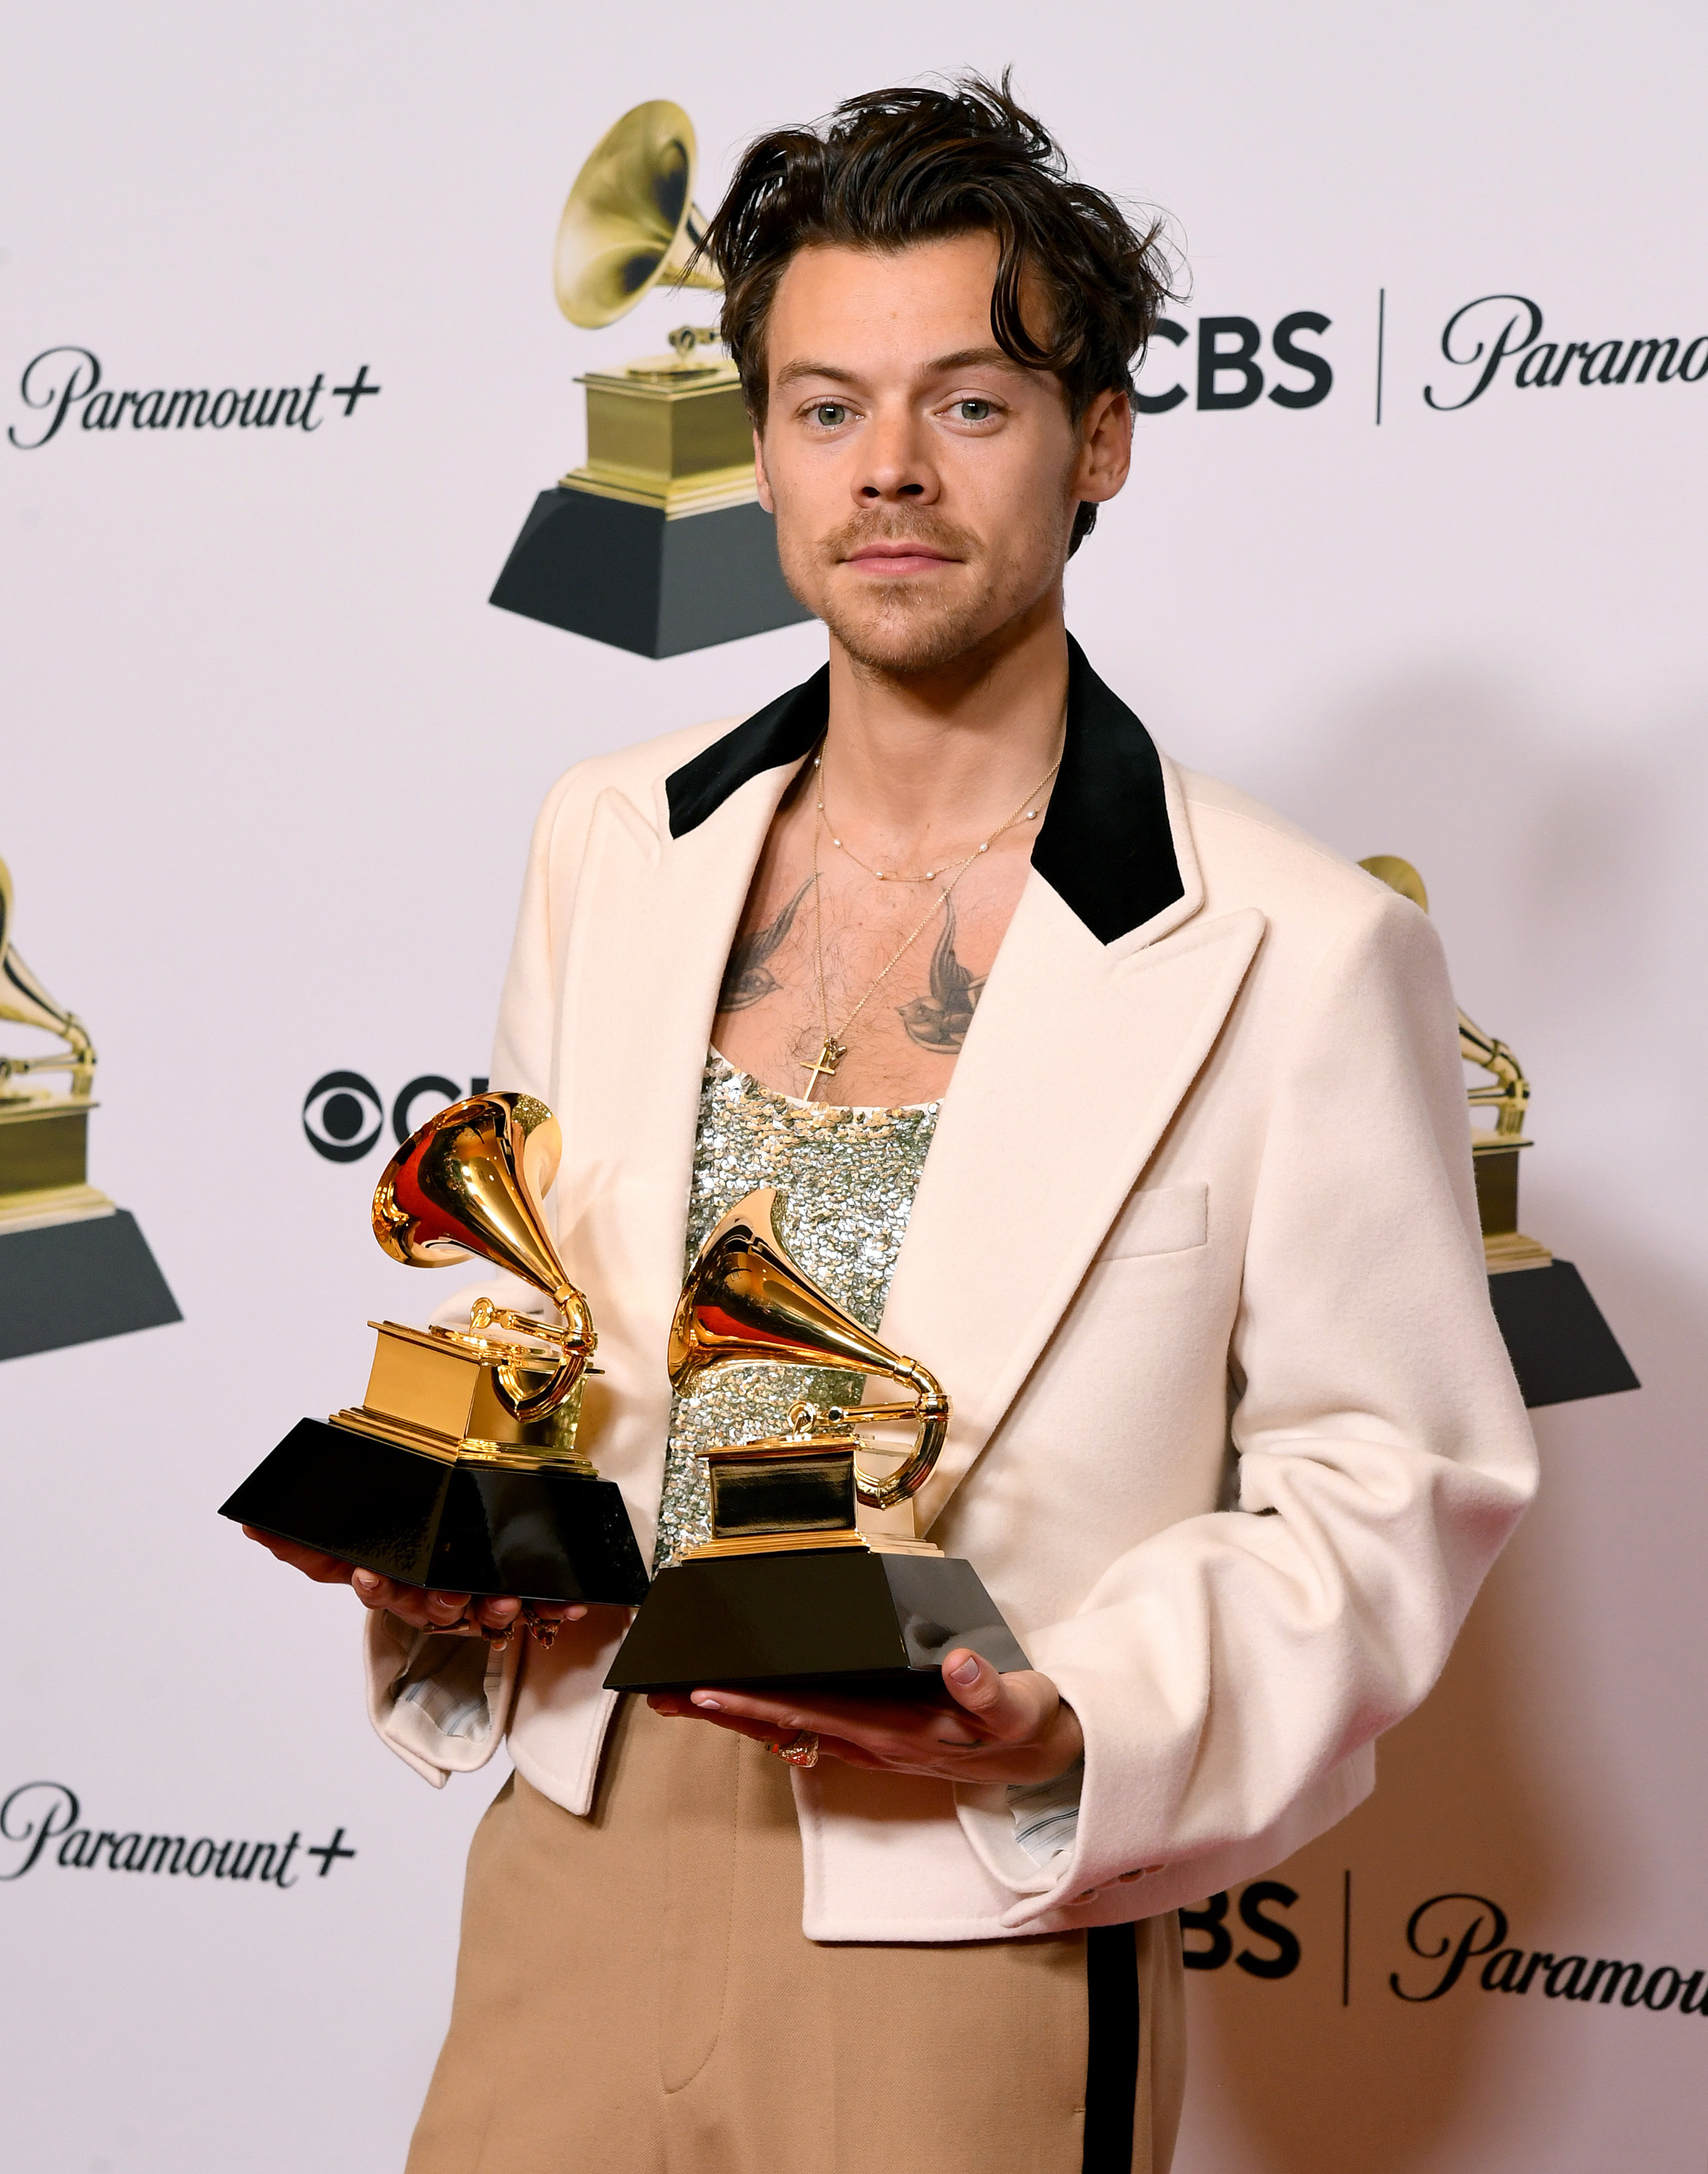 his chest tattoos are showing above his shirt and he&#x27;s holding two awards